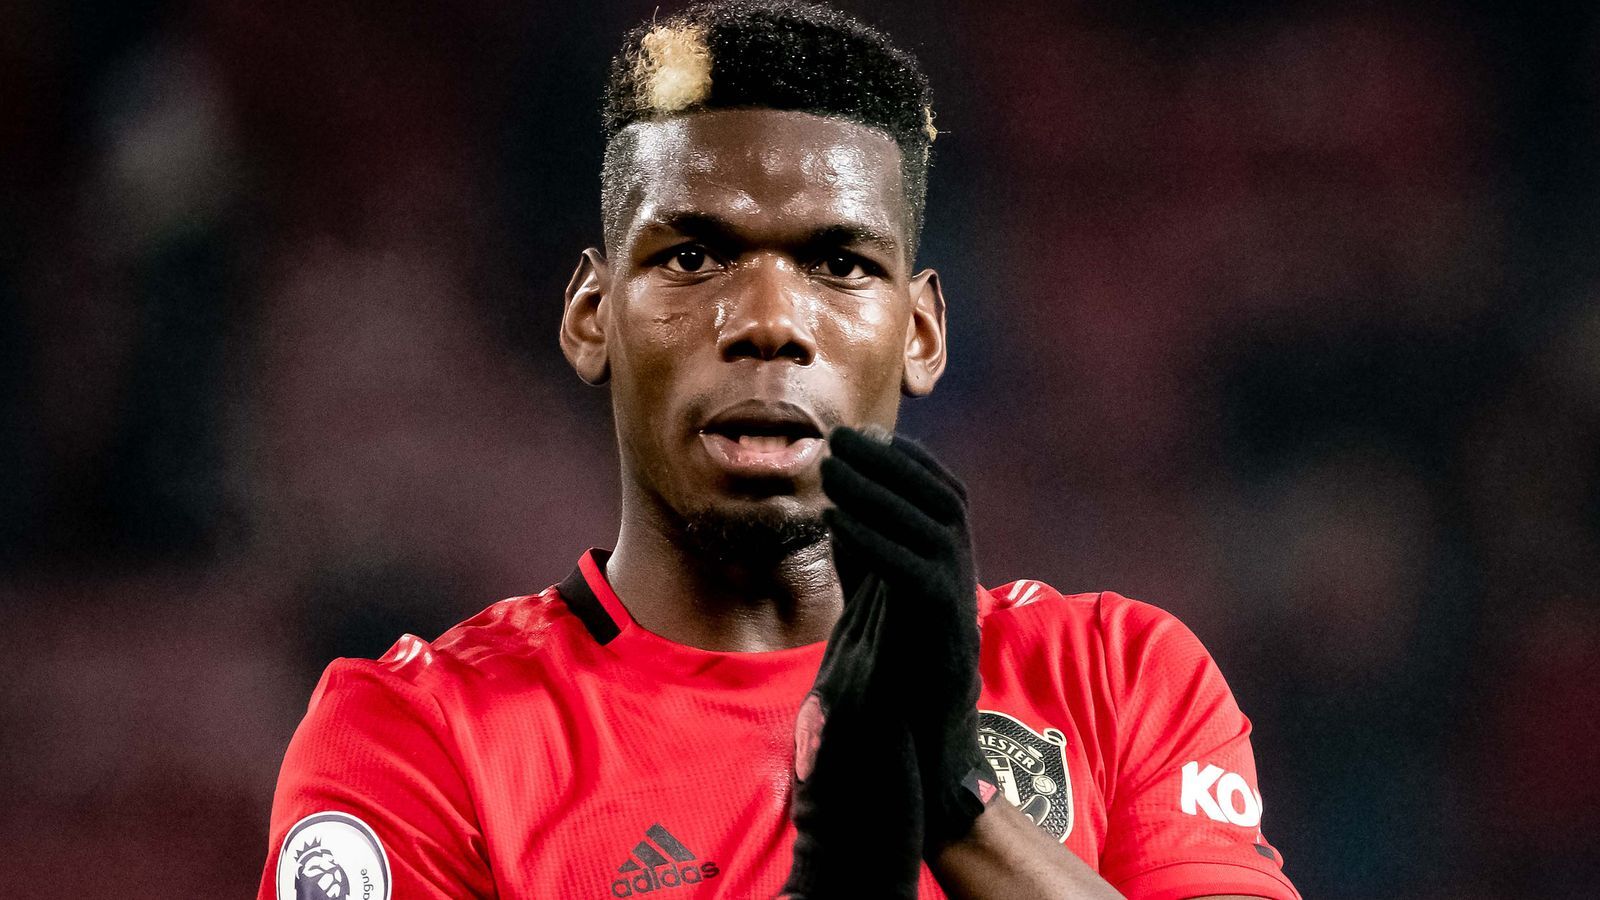 Pogba and Fernandes Could Forge a Strong Midfield Partnership for Manchester United